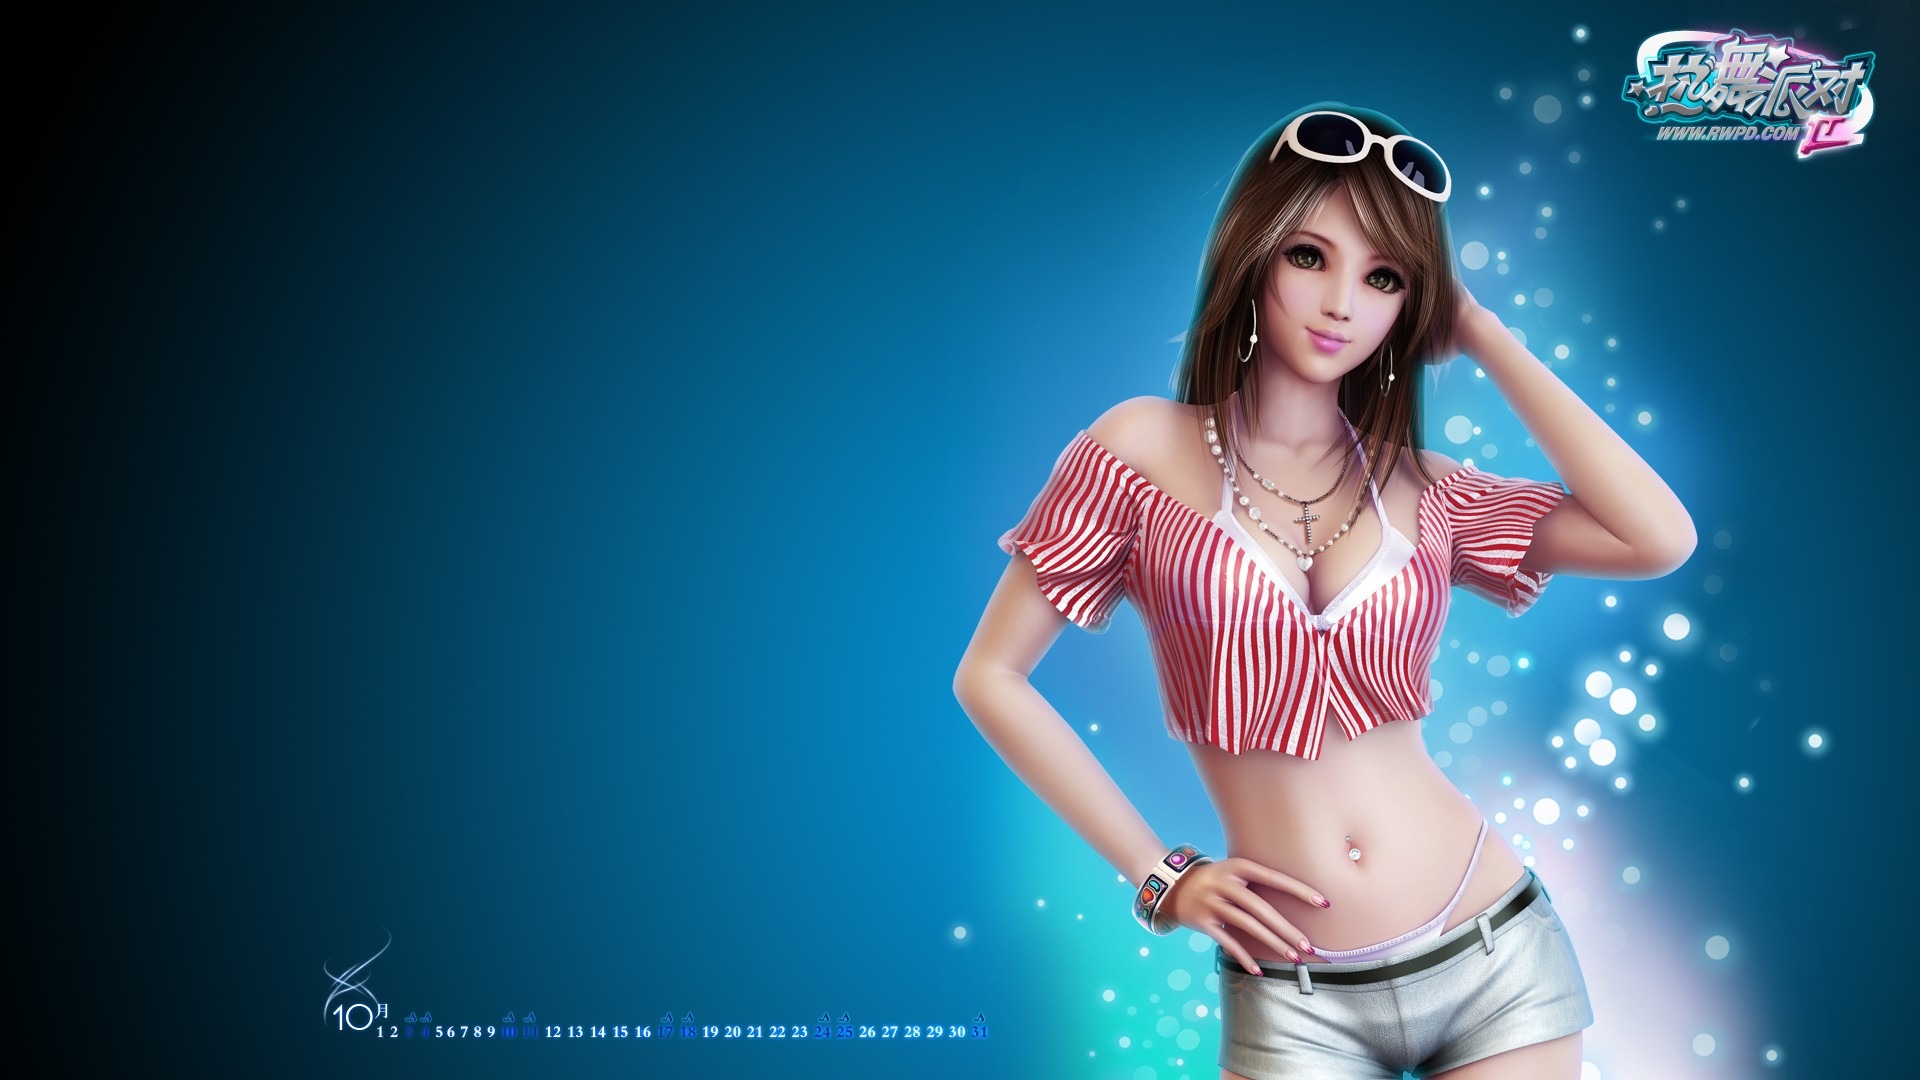 Online game Hot Dance Party II official wallpapers #4 - 1920x1080